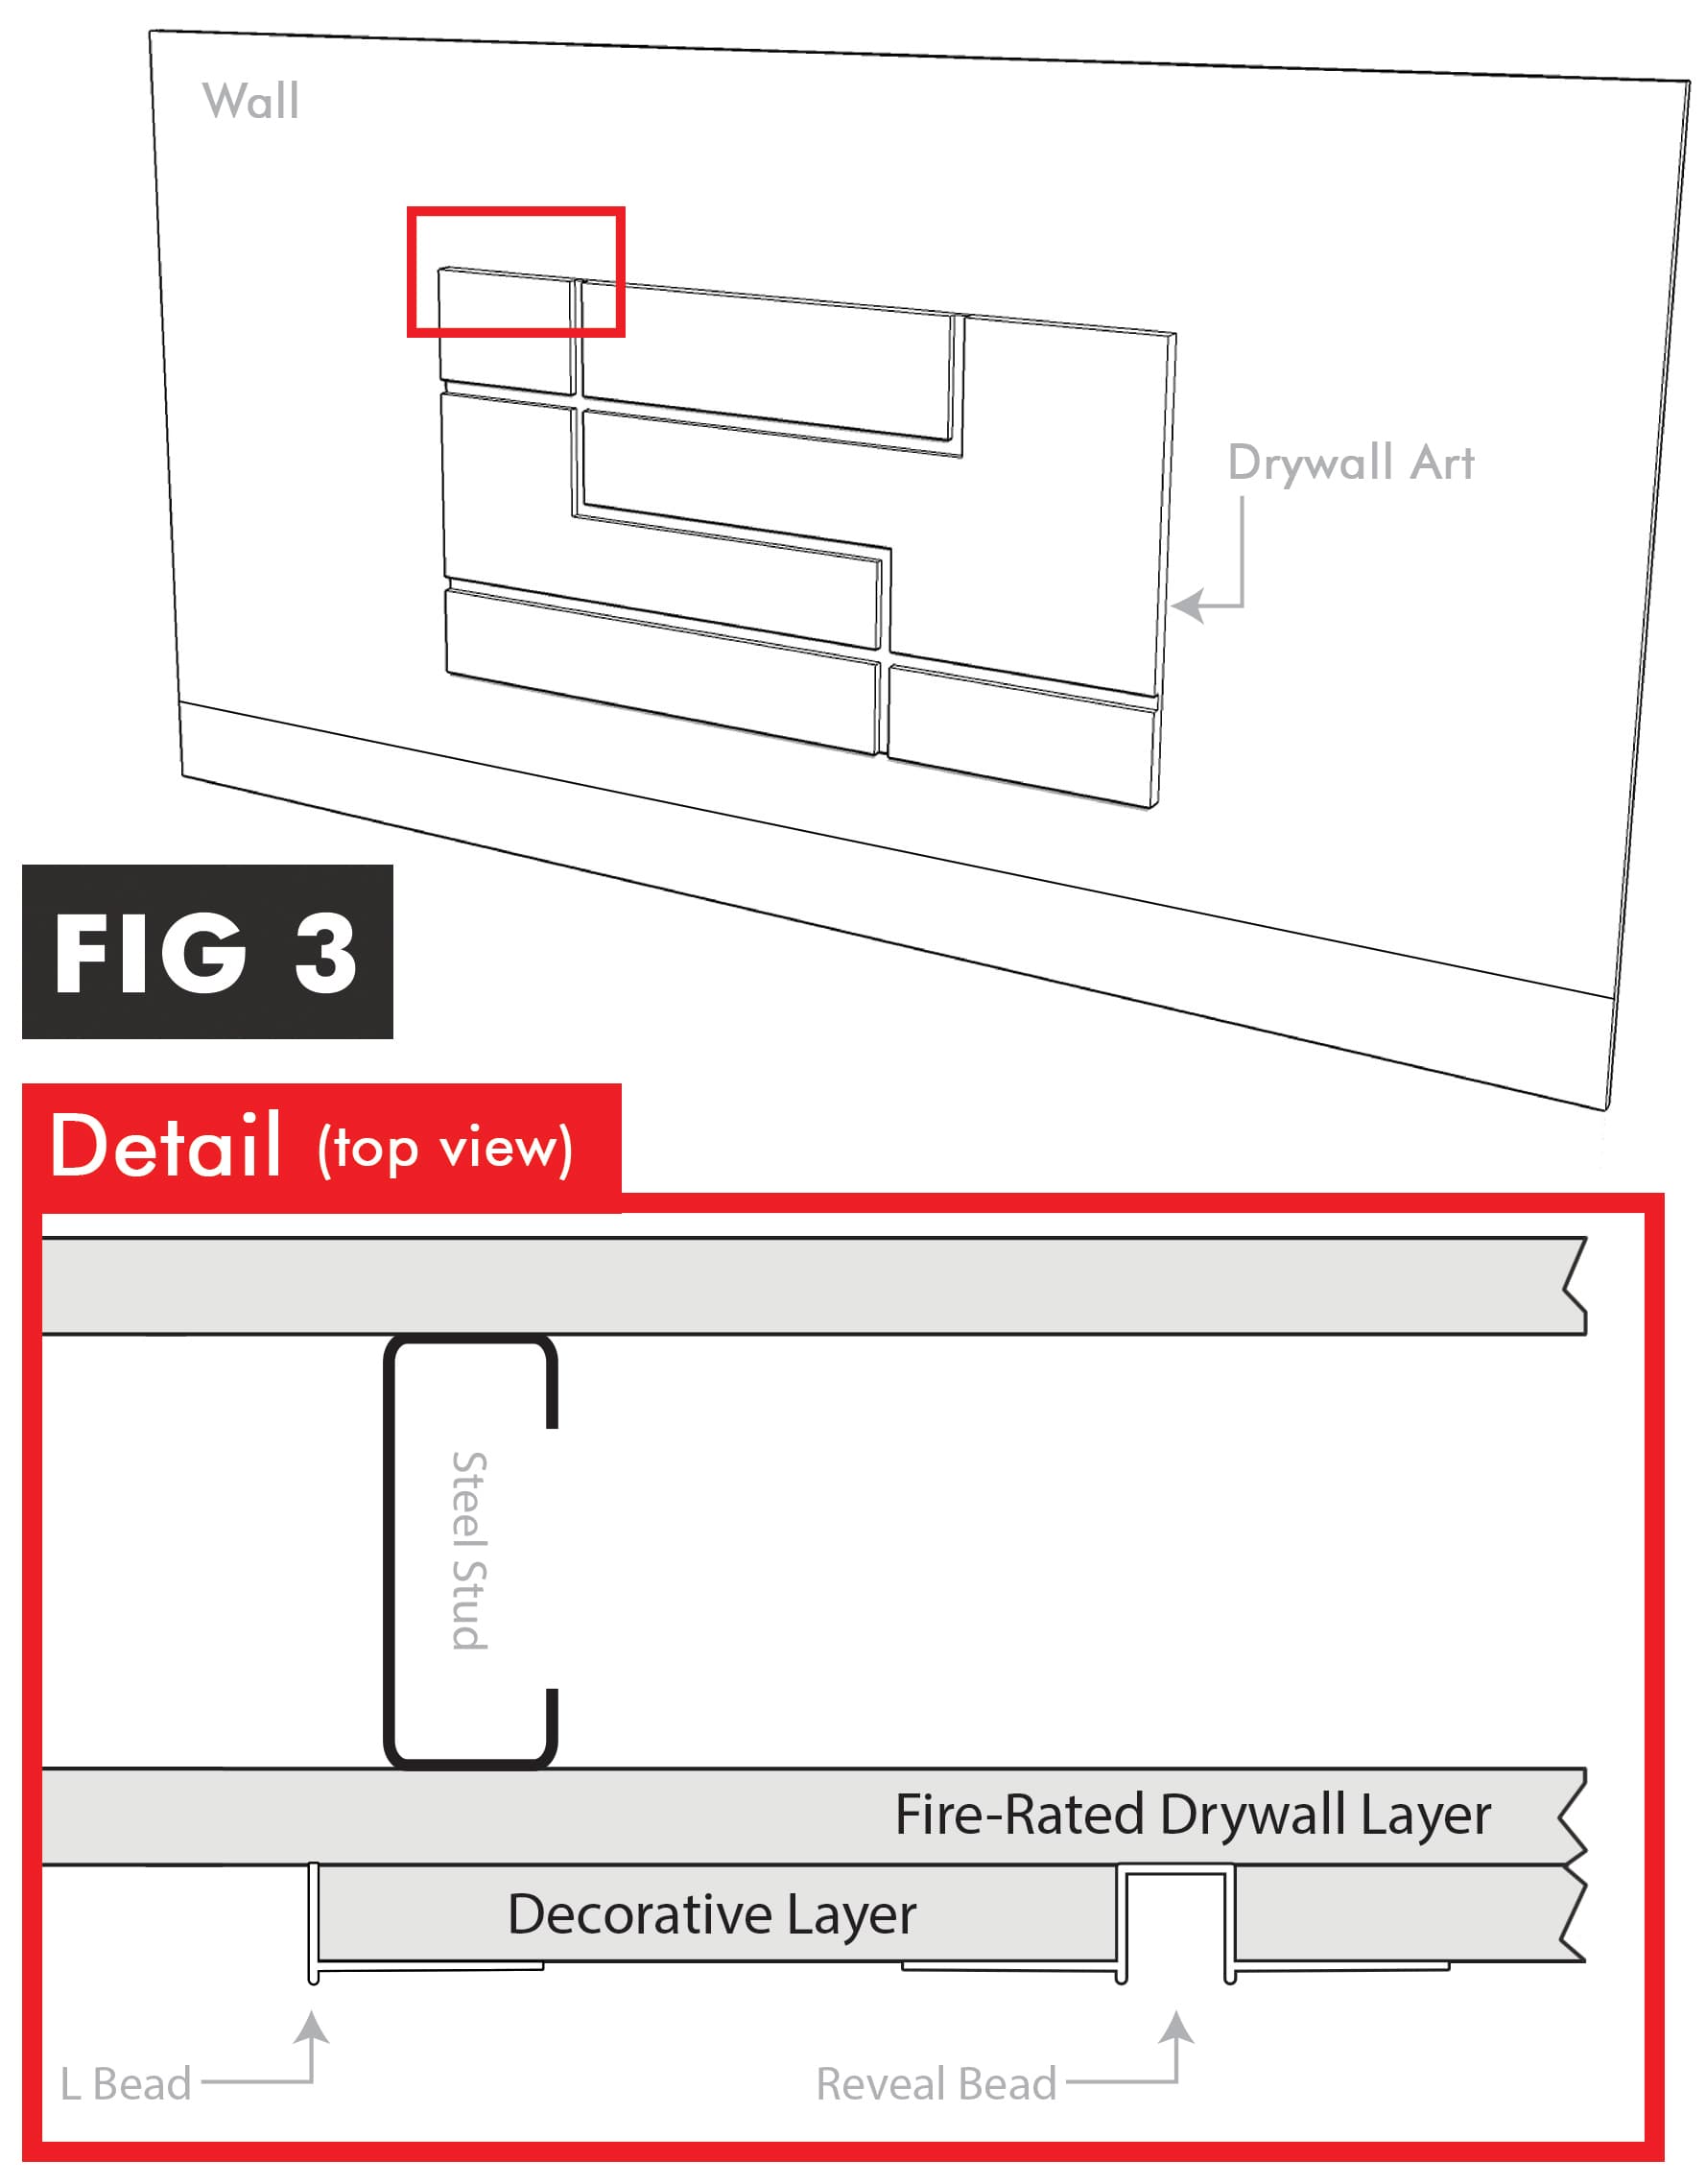 Build a drywall art design over only a section of your wall and attach it on top of your continuous barrier layer of drywall to maintain fire rating.